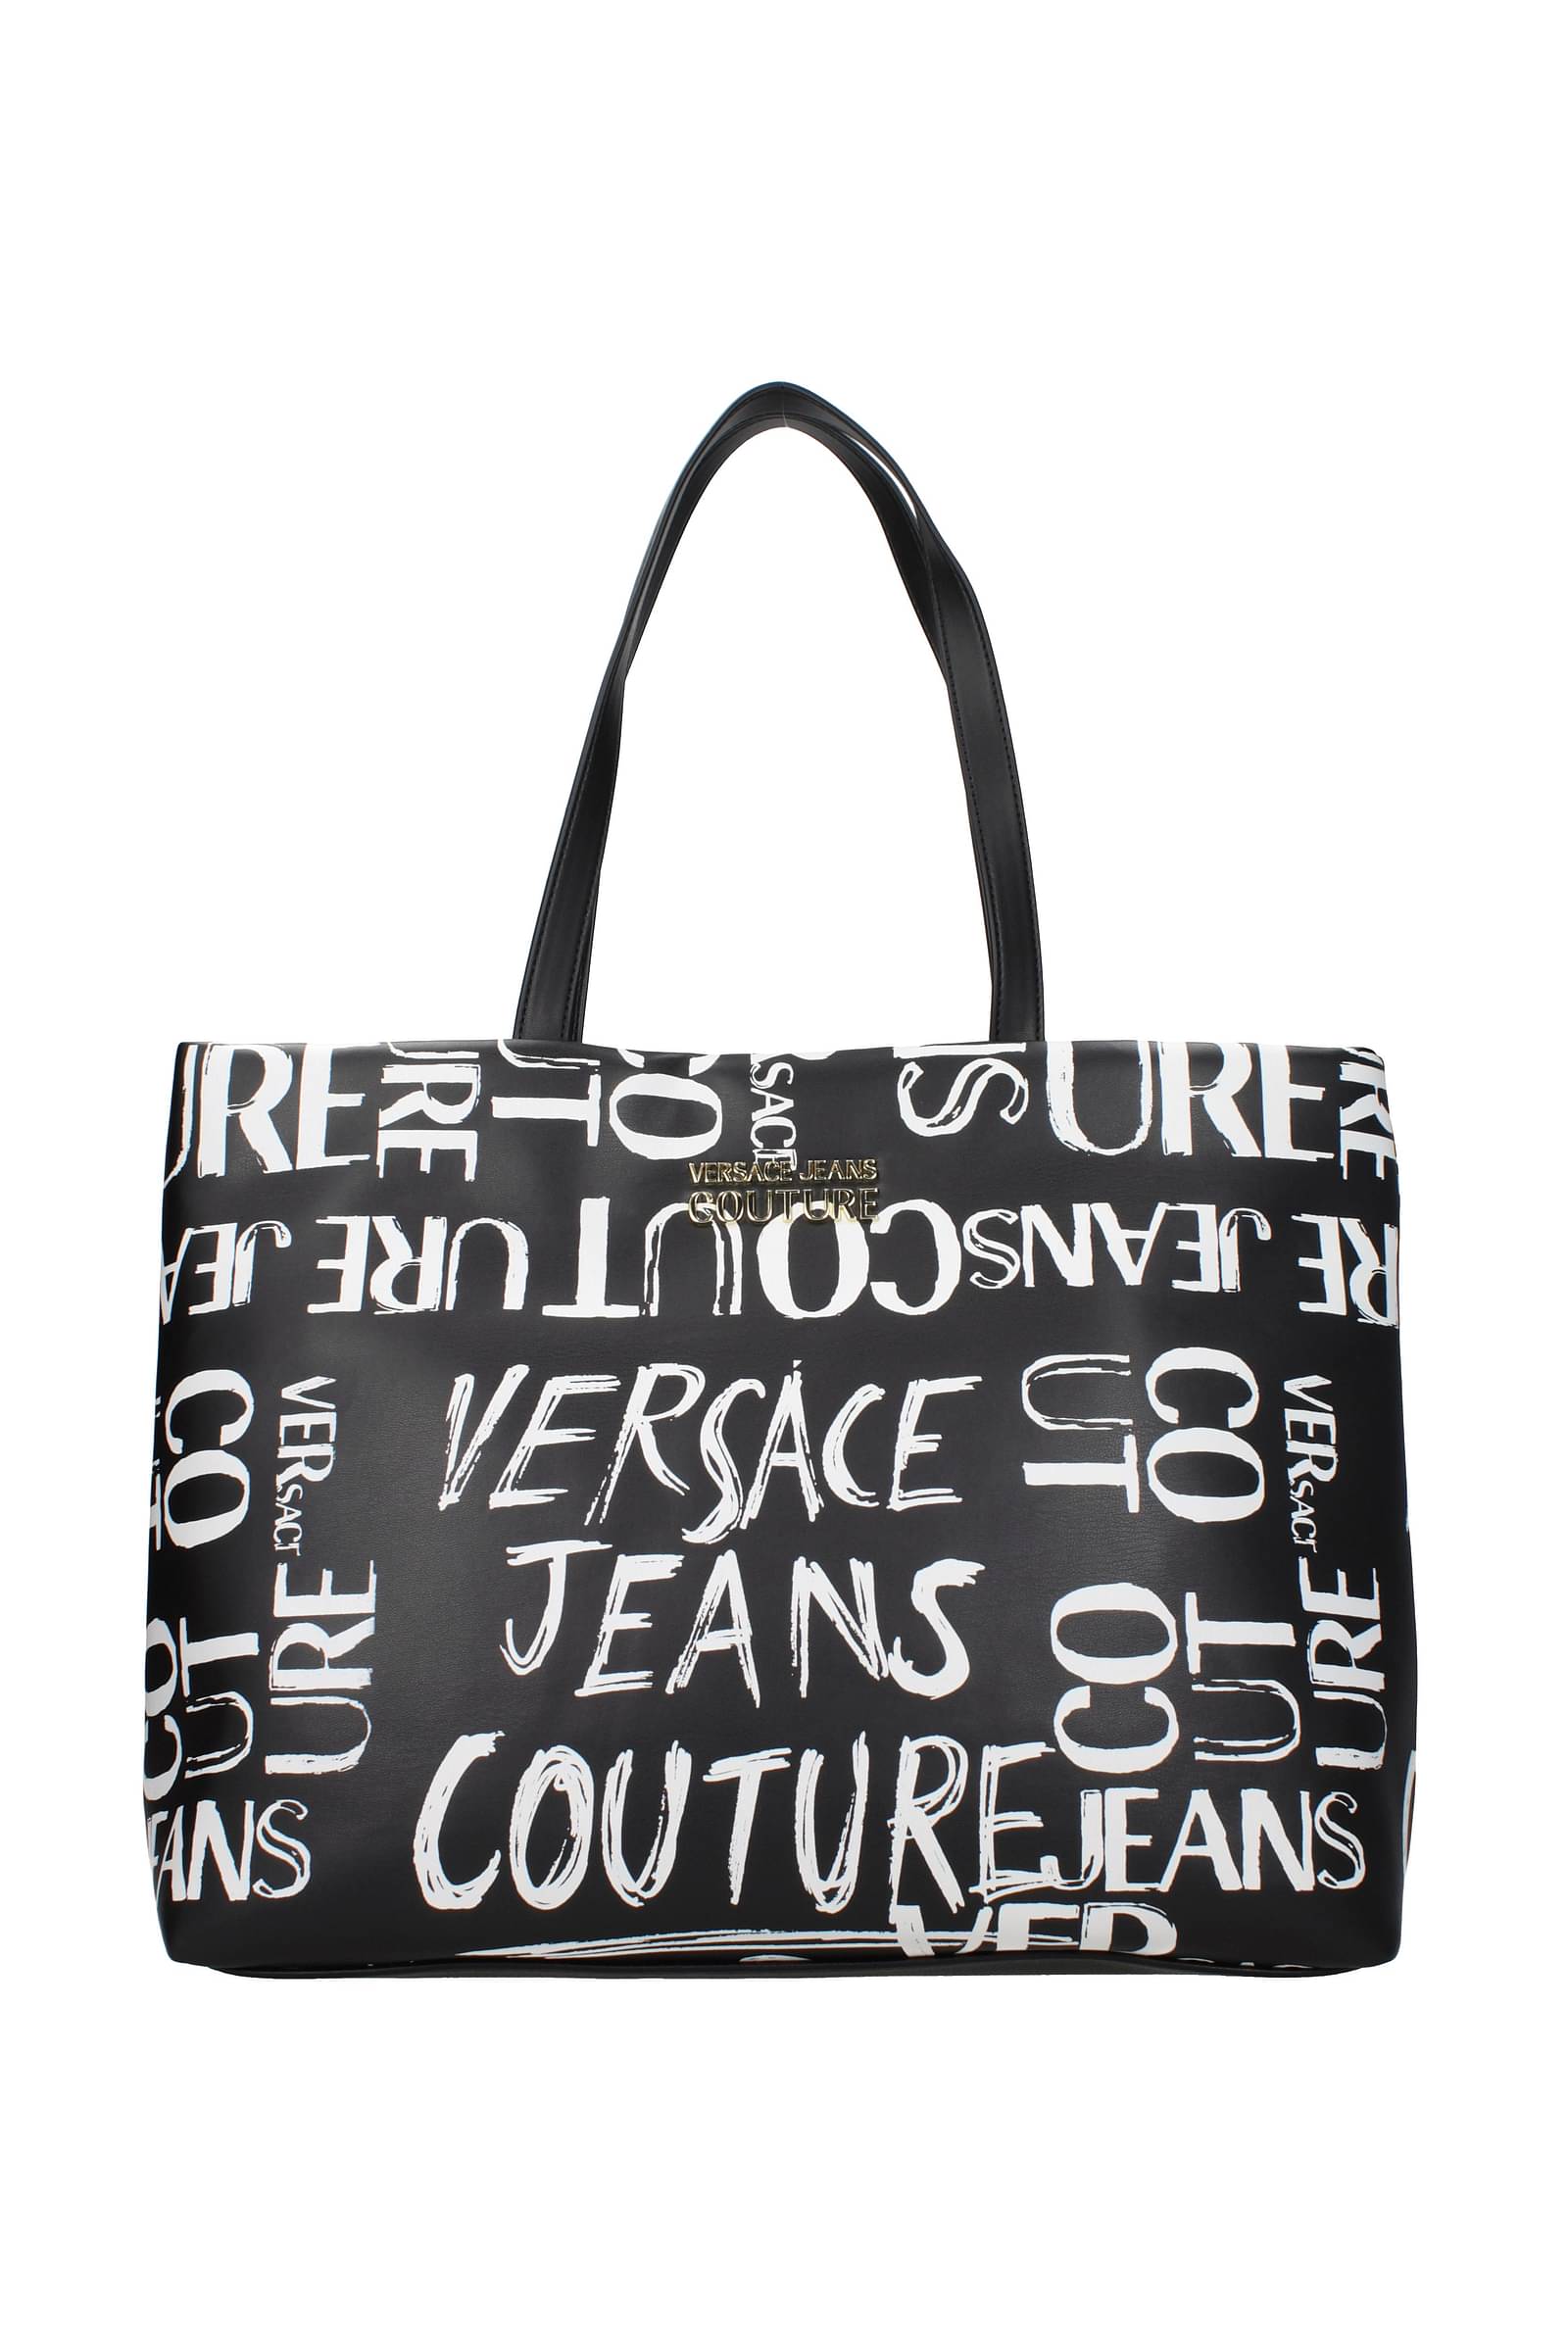 VERSACE JEANS COUTURE ハンドバッグ ブラック ホワイトバッグ